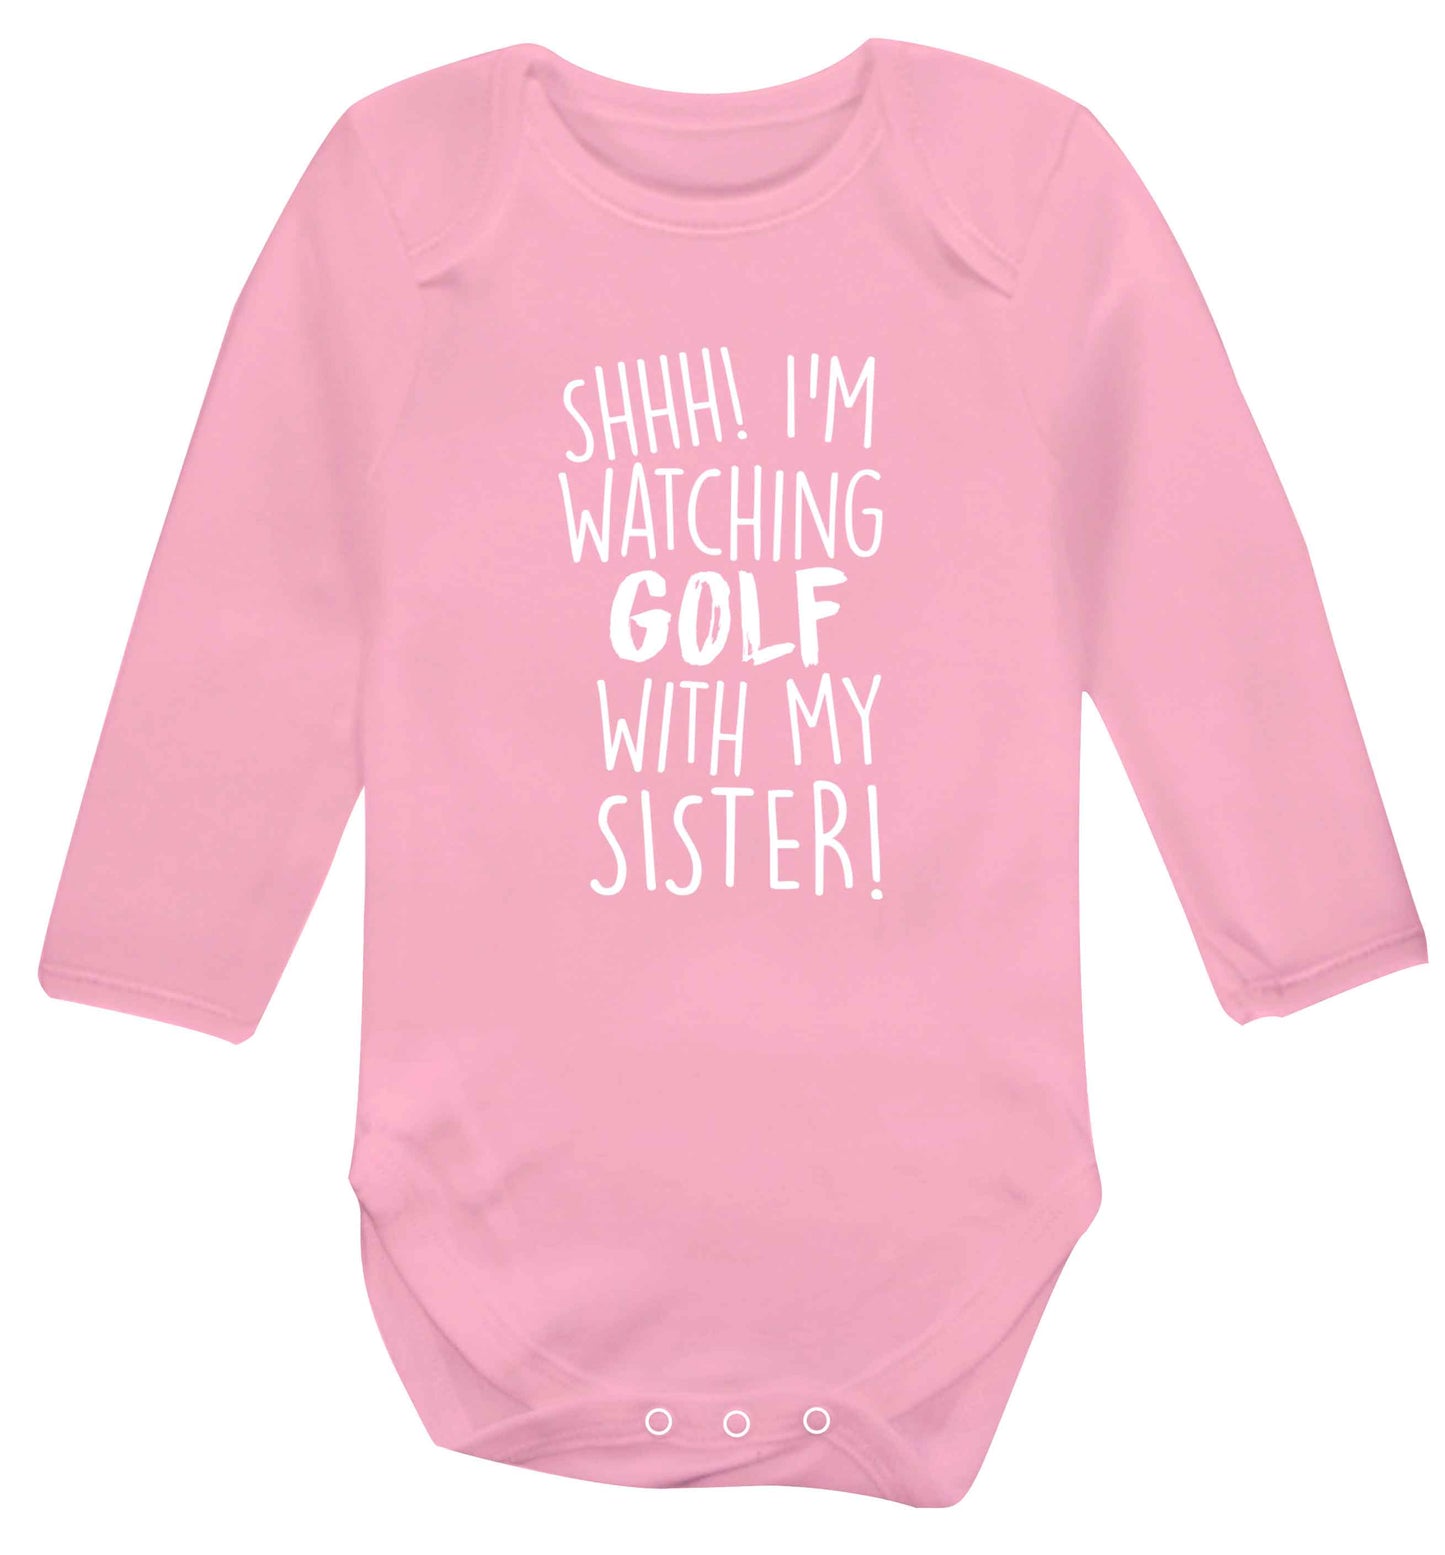 Shh I'm watching golf with my sister Baby Vest long sleeved pale pink 6-12 months